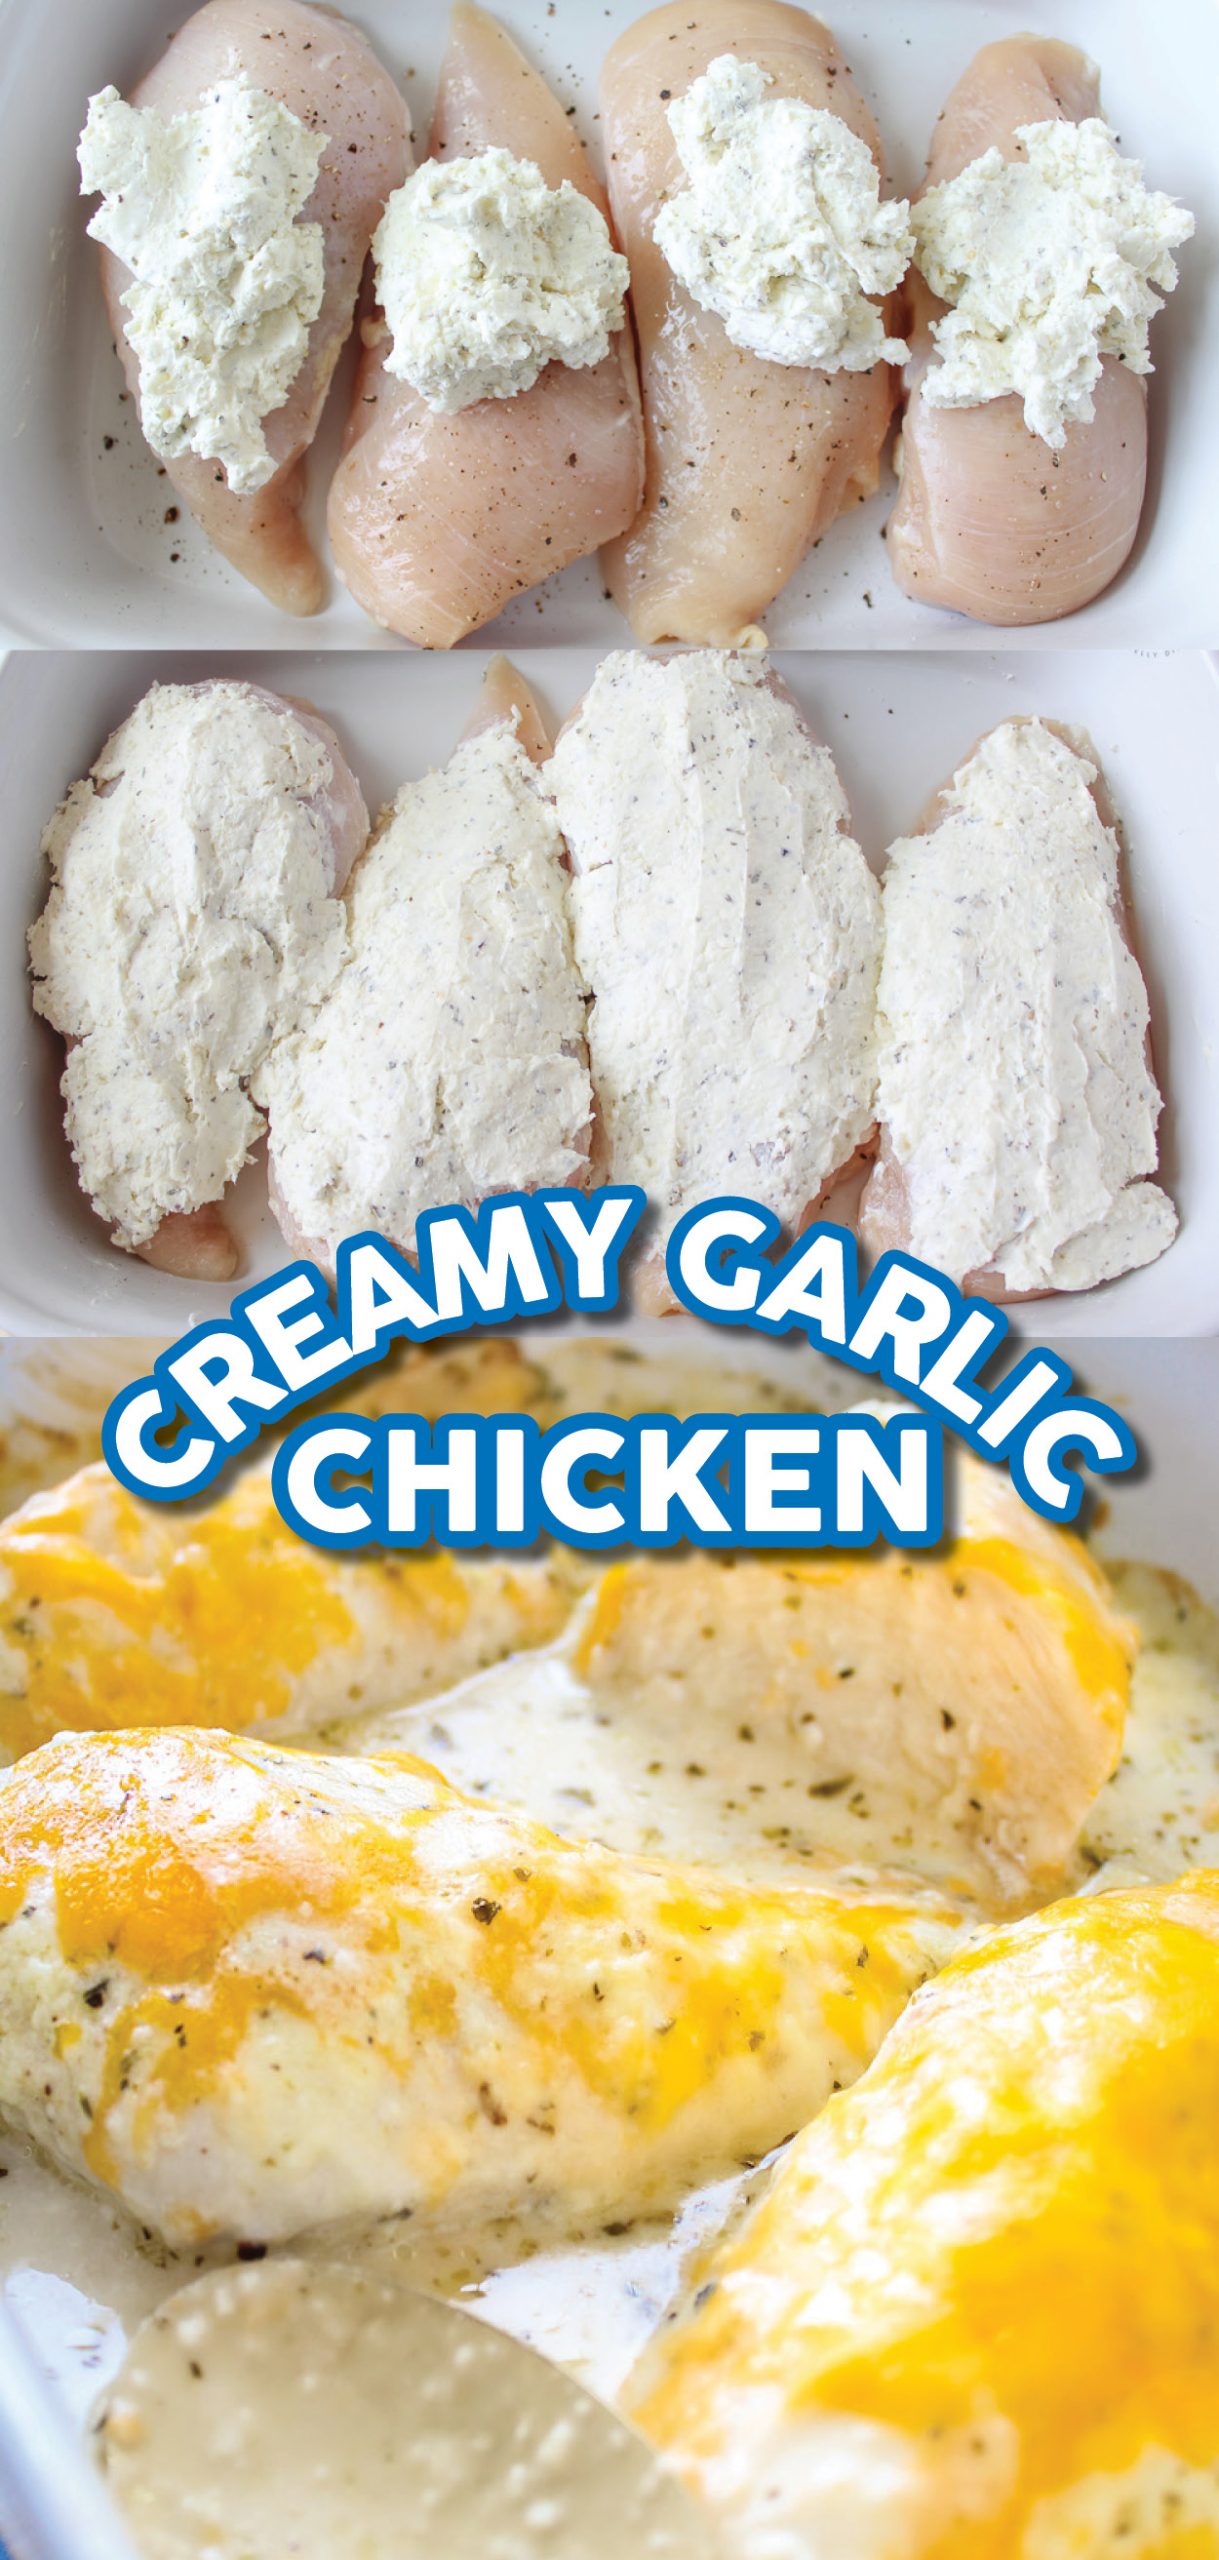 This recipe from Smart School House for creamy garlic chicken tastes AMAZING and it’s so simple to make! Tender and juicy chicken covered in a mouthwatering, creamy, cheesy topping. This quick and easy dinner uses simple ingredients, and the whole family will love it! Try making this amazing recipe from Smart School House today! #chicken #garlic #recipes #dinner #easy